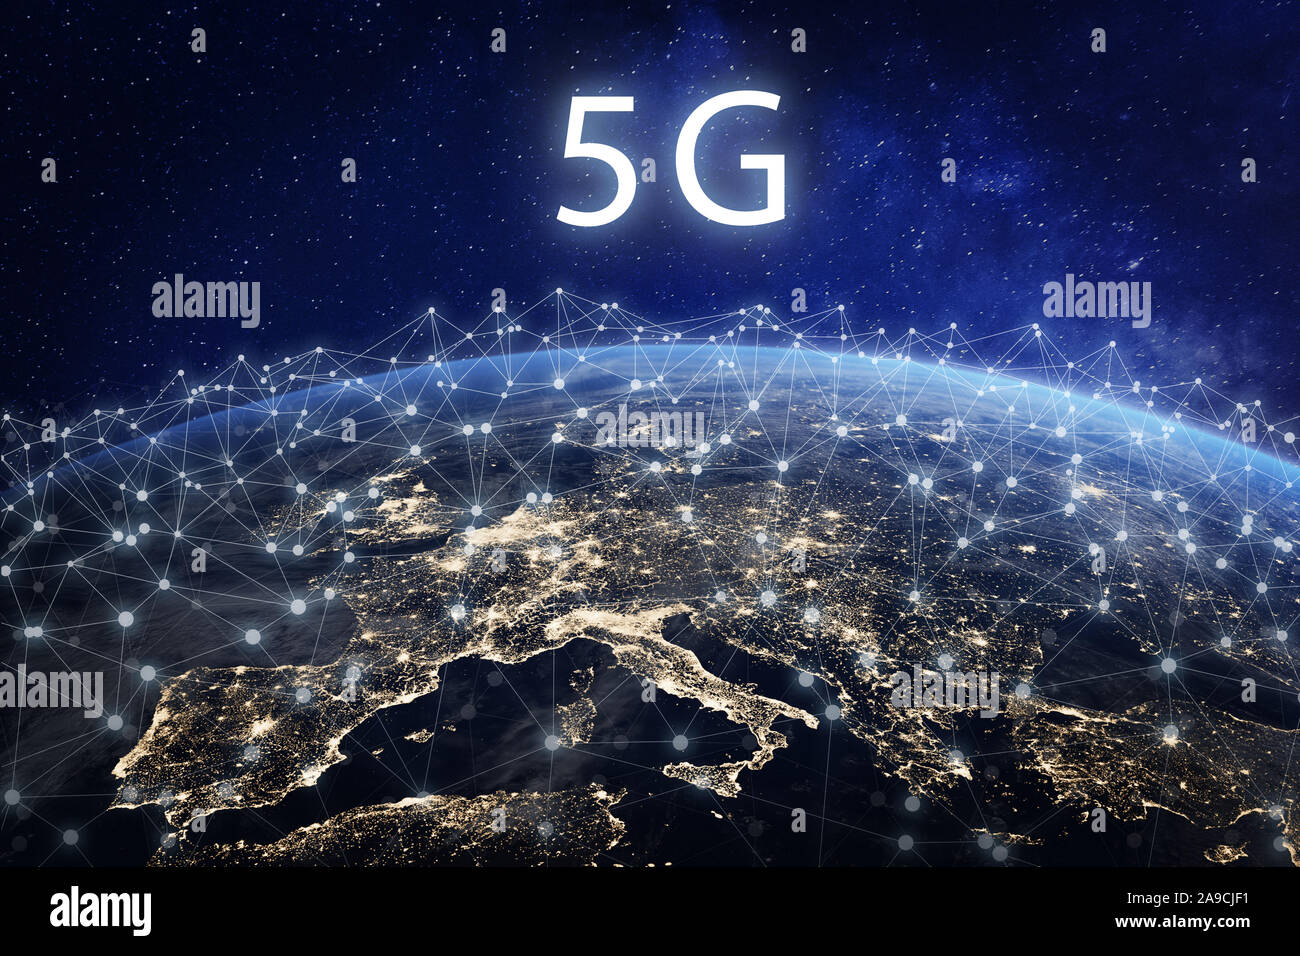 5G mobile telecommunication network in Europe for high speed wireless data connection to internet from smartphones, fifth generation radio wave commun Stock Photo